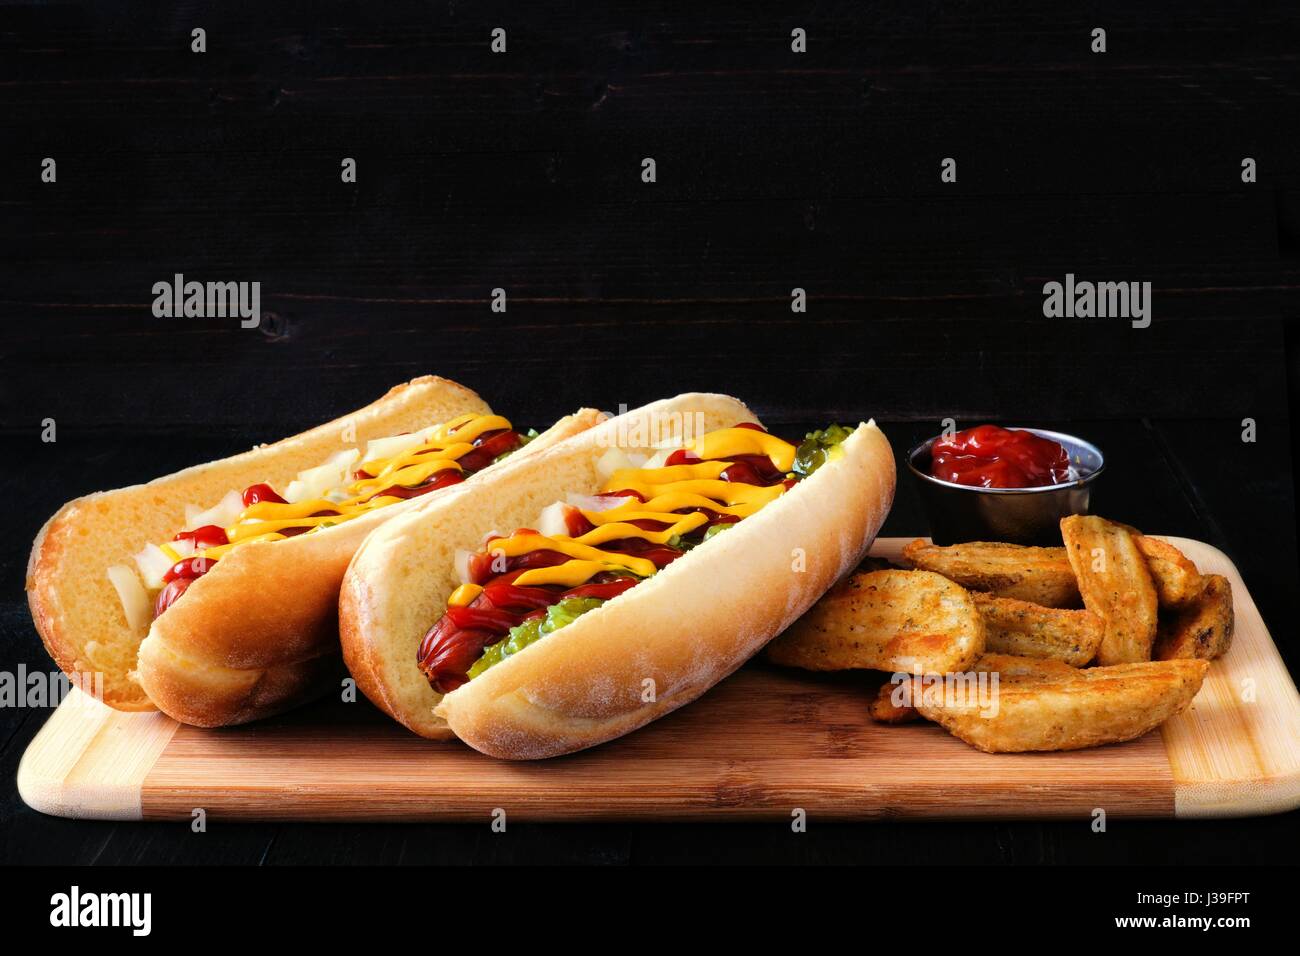 Two hot dogs fully loaded with toppings and potato wedges on wooden board with dark background Stock Photo